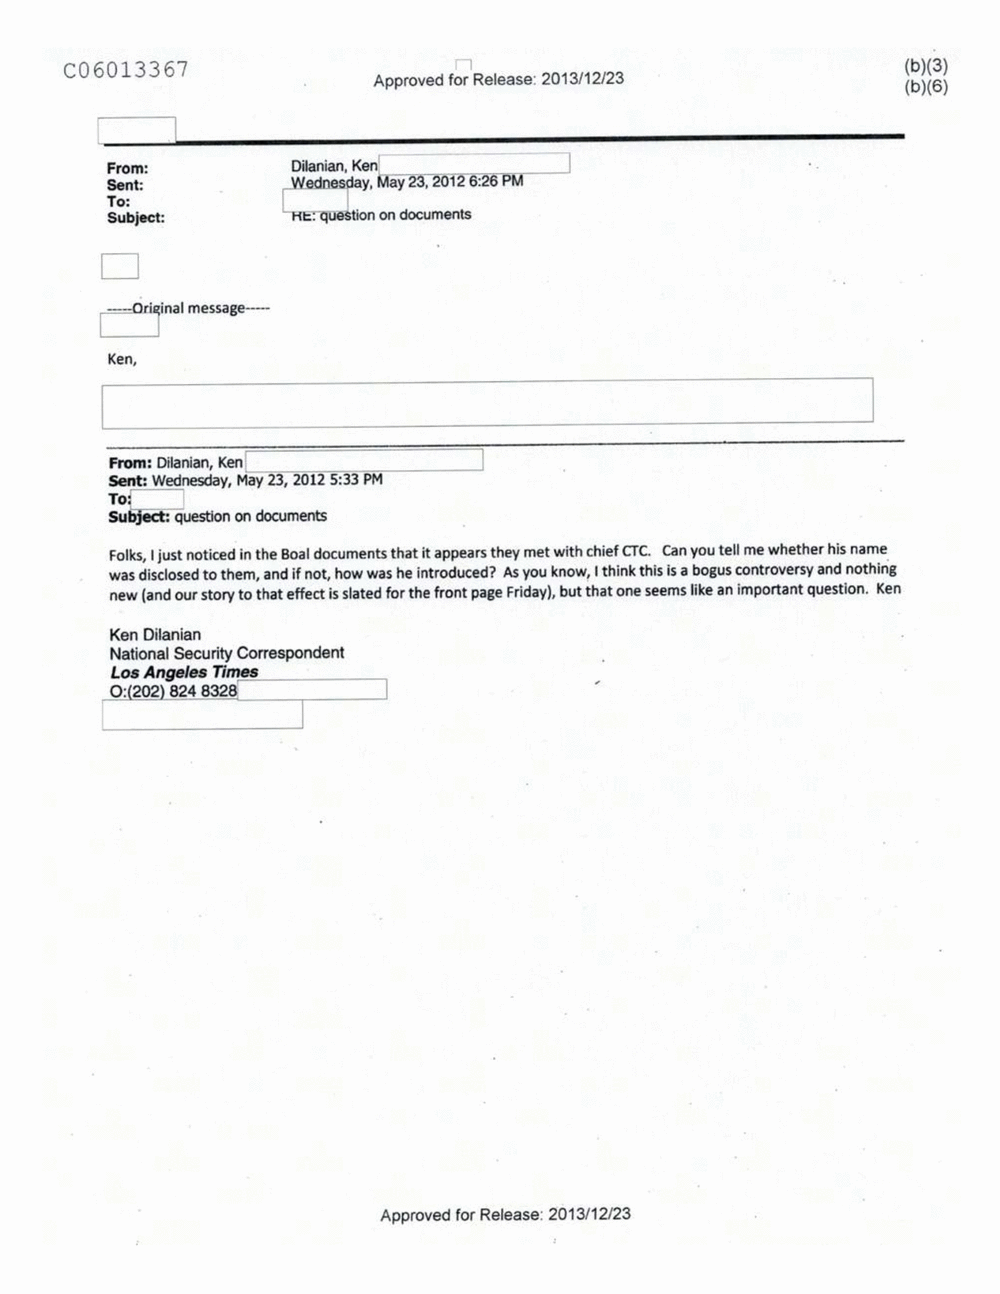 Page 291 from Email Correspondence Between Reporters and CIA Flacks